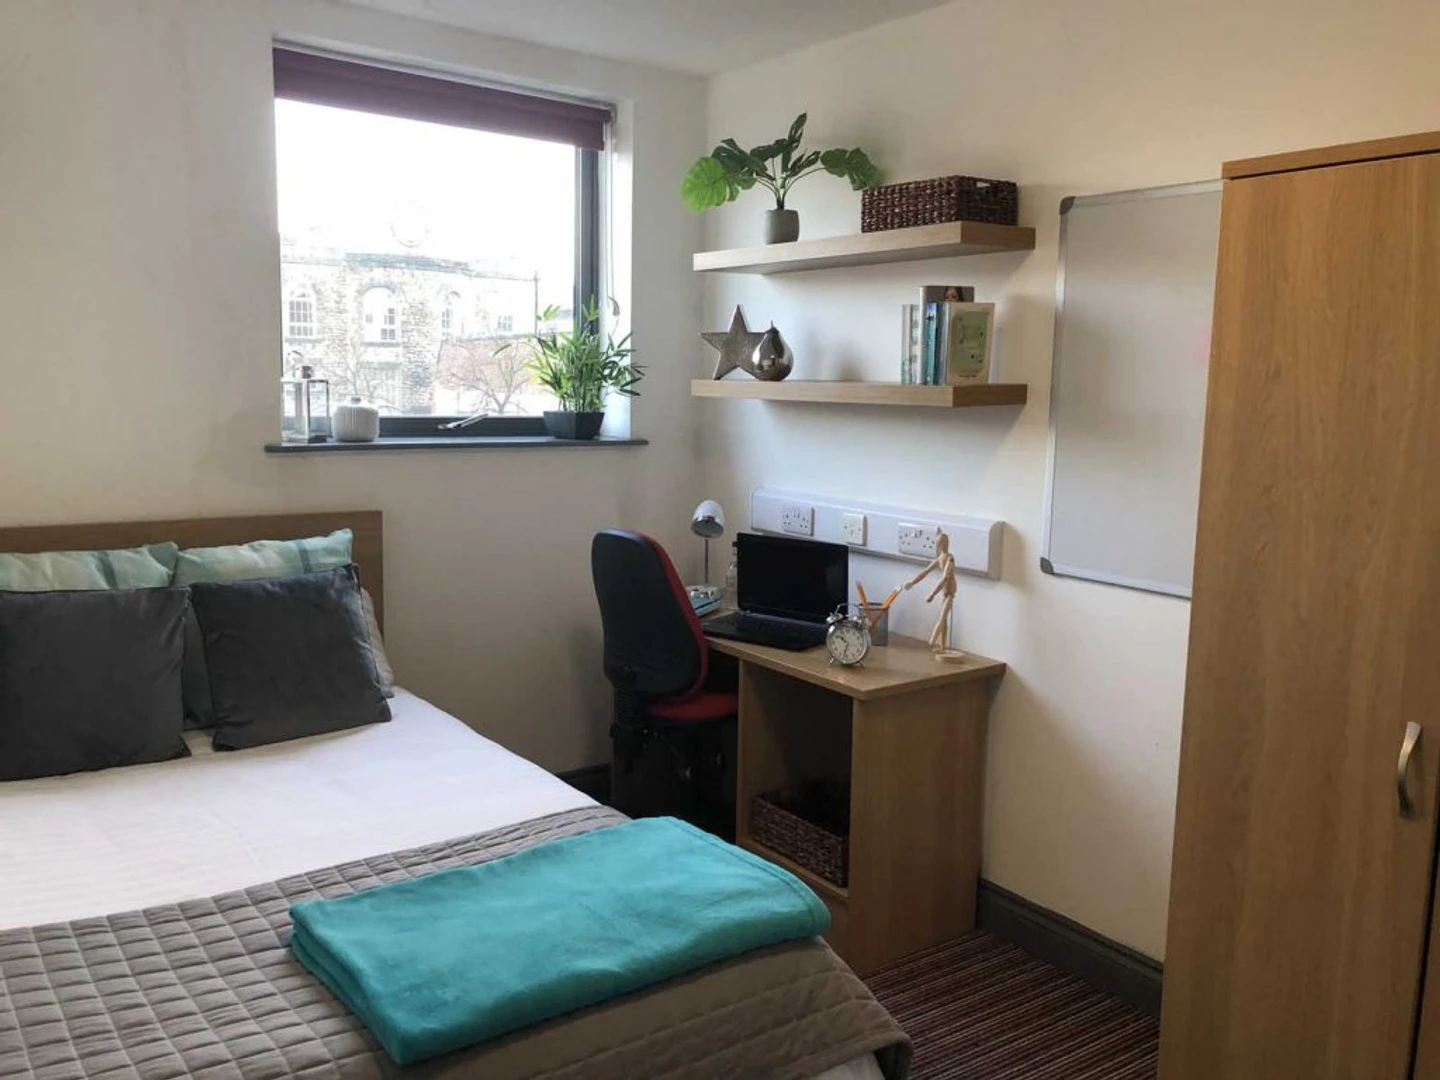 Renting rooms by the month in Sunderland